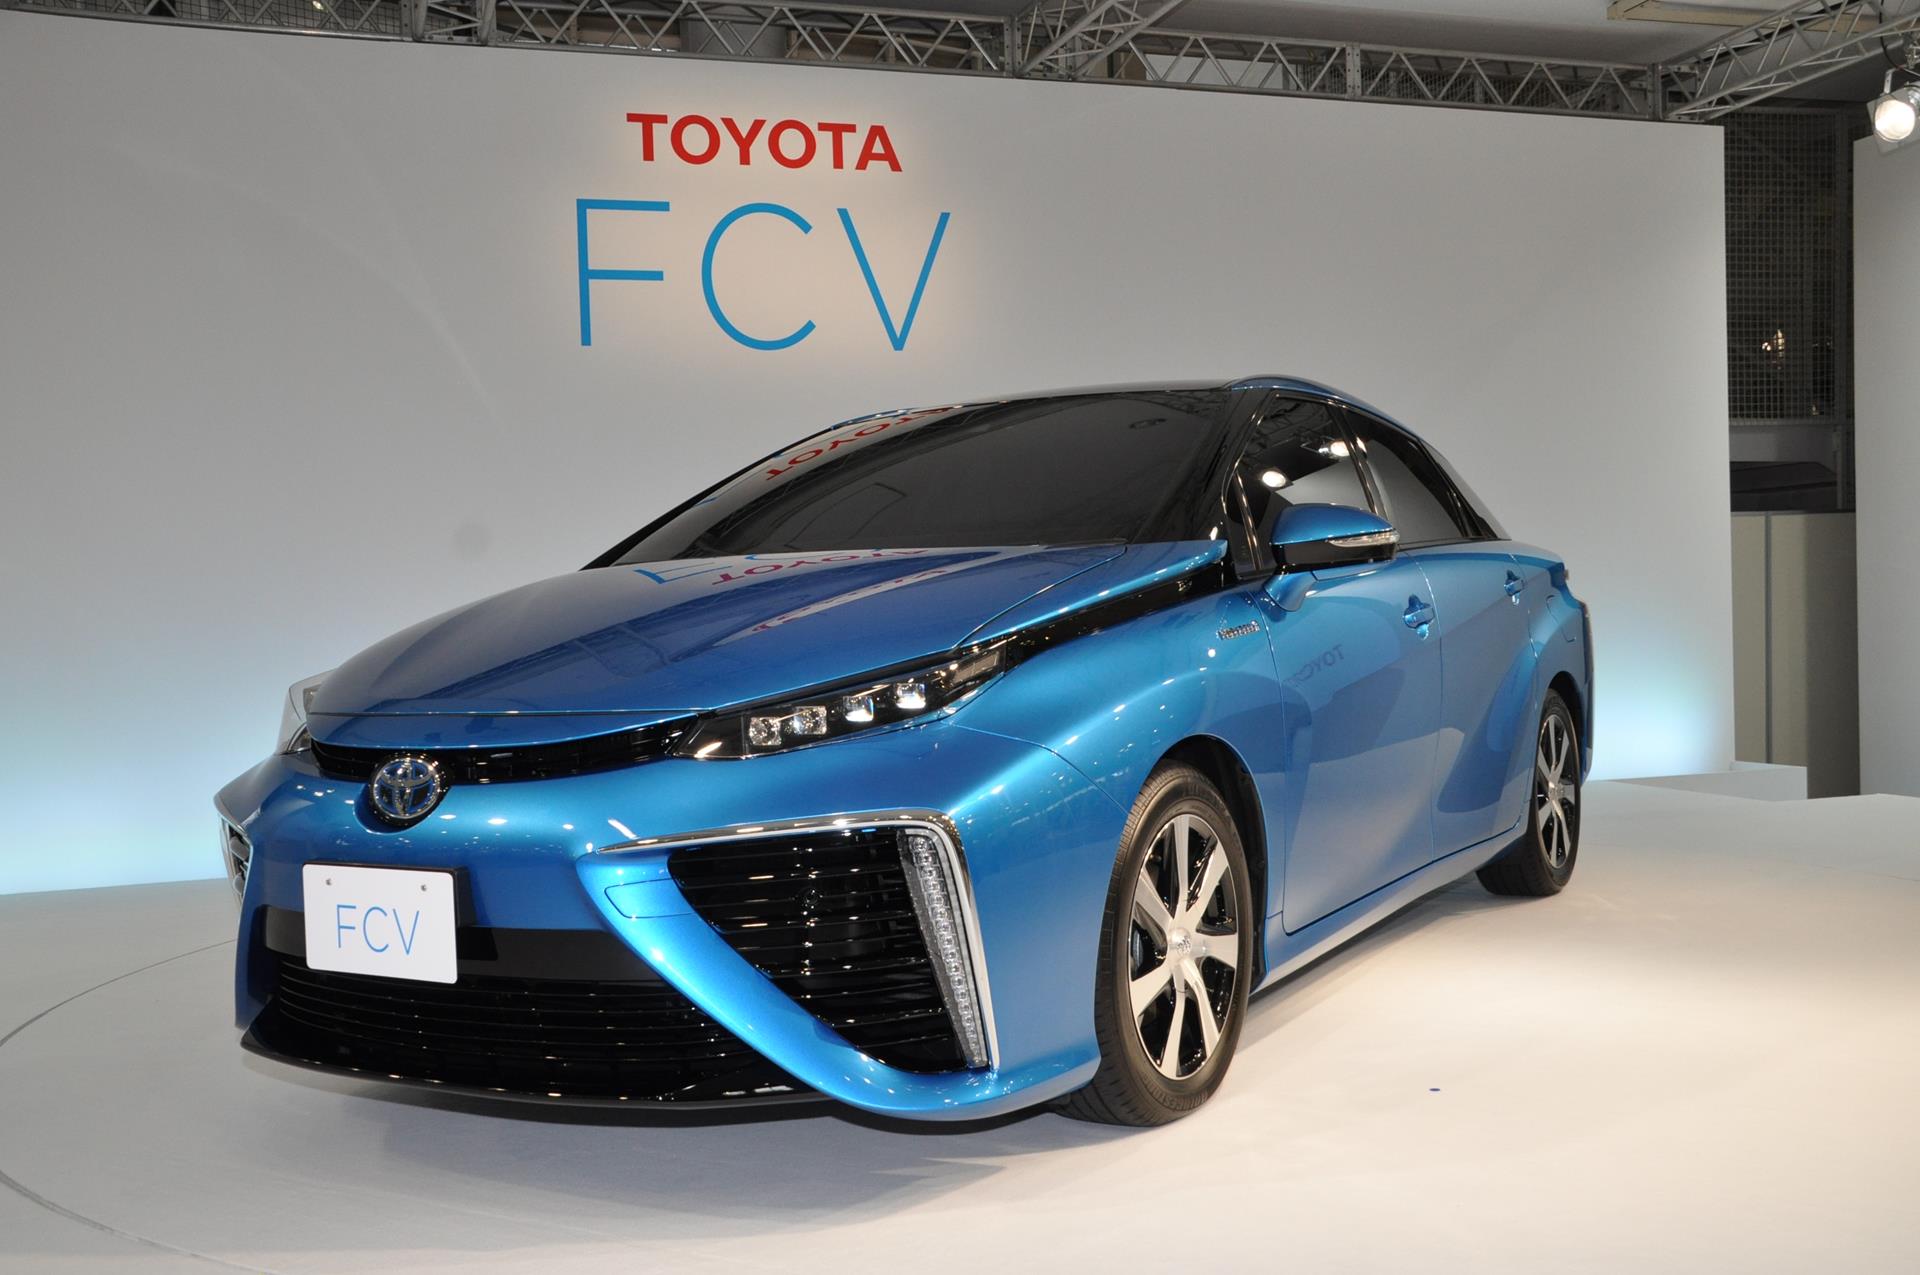 How EcoFriendly are Hydrogen Fuel Cell Vehicles? The News Wheel